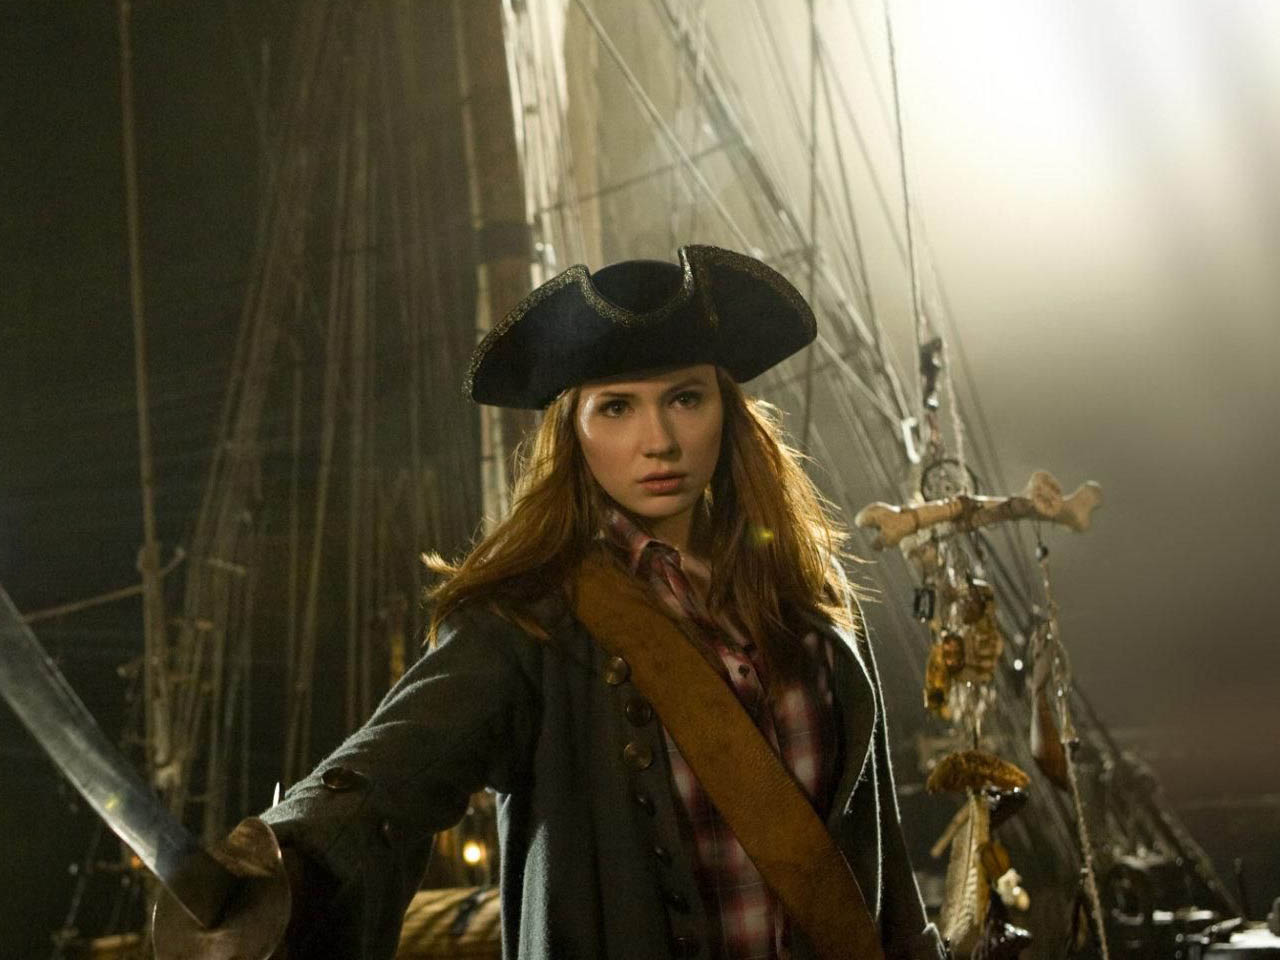 Karen Gillan reportedly up for Pirates of the Caribbean reboot | The Nerdy